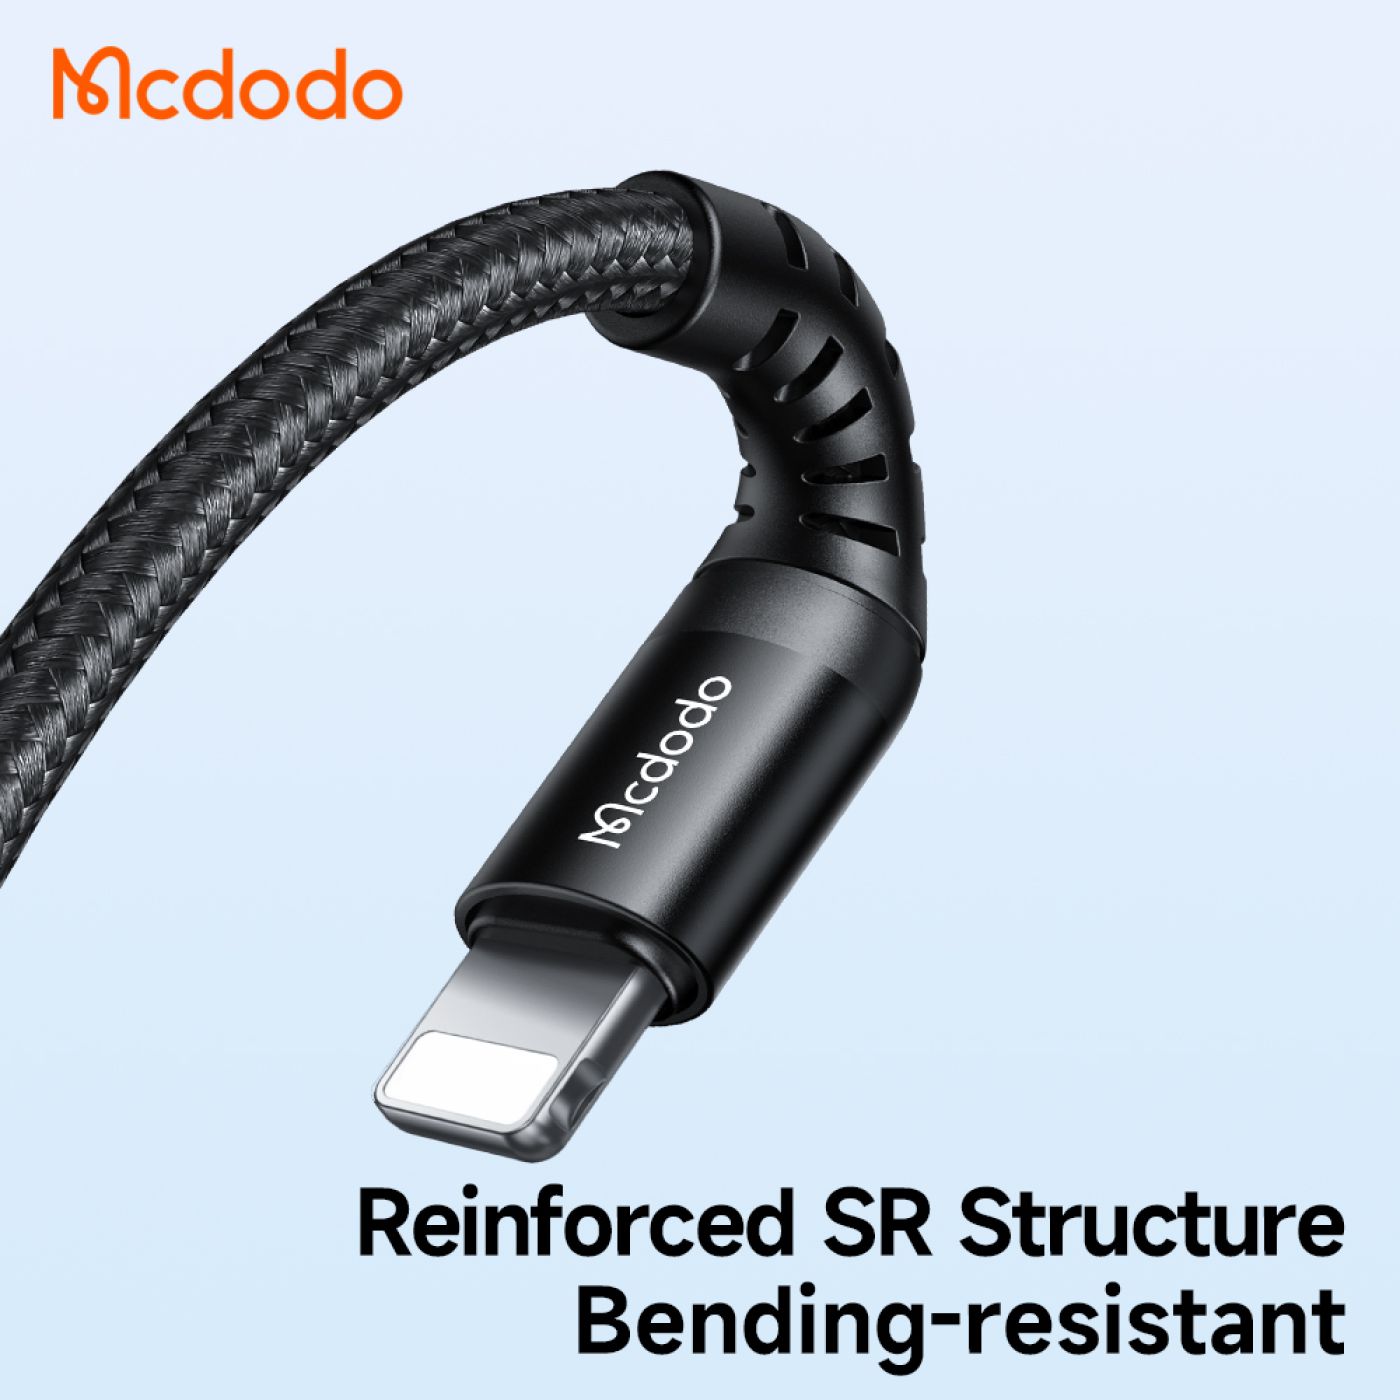 Cáp Sạc Nhanh Mcdodo Buy Now Series PD Data Cable C to iP 36W